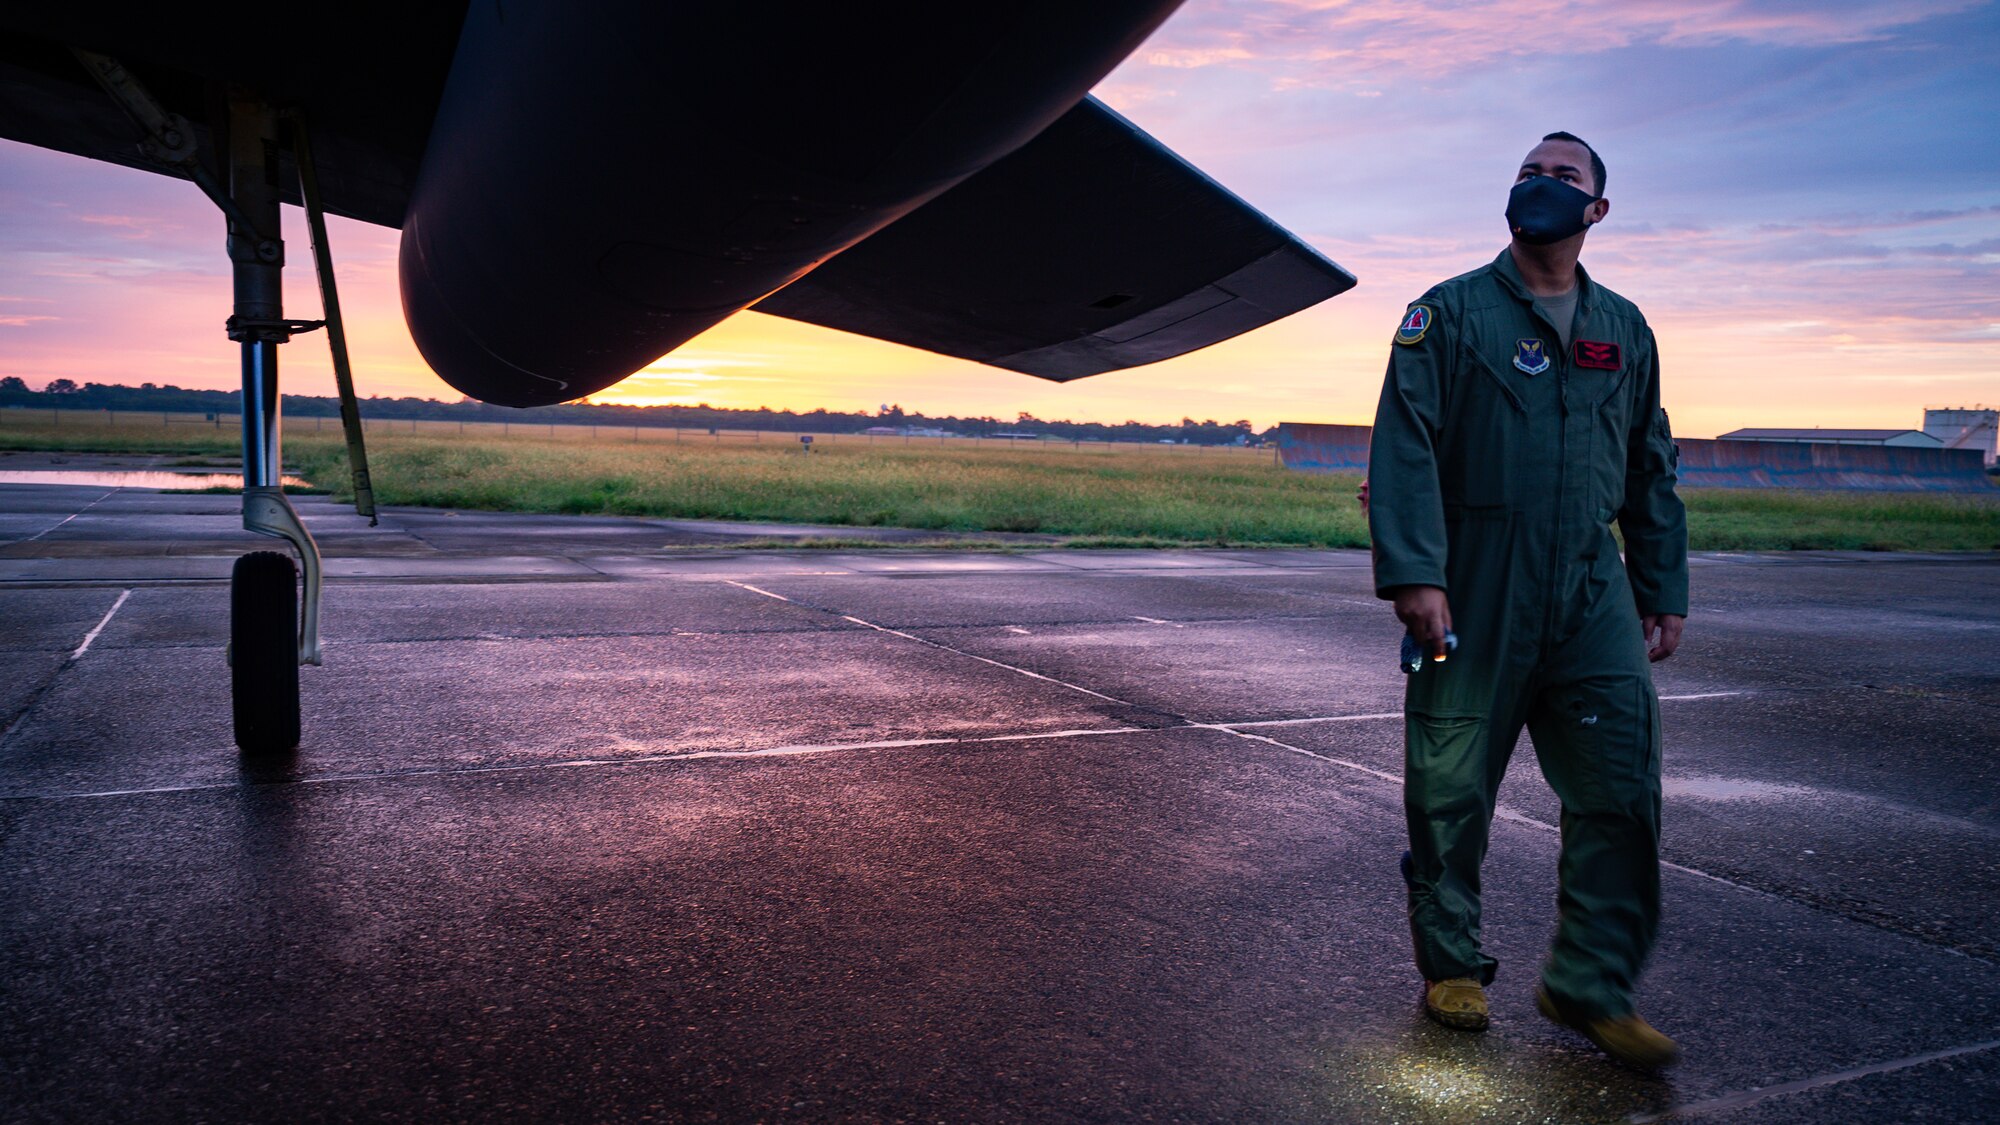 Capt. Fernando Abreu Perez, 96th Bomb Squadron aircraft commander, performs pre-flight checks on a B-52H Stratofortress before takeoff during a readiness exercise at Barksdale Air Force Base, Louisiana, Aug. 18, 2021.